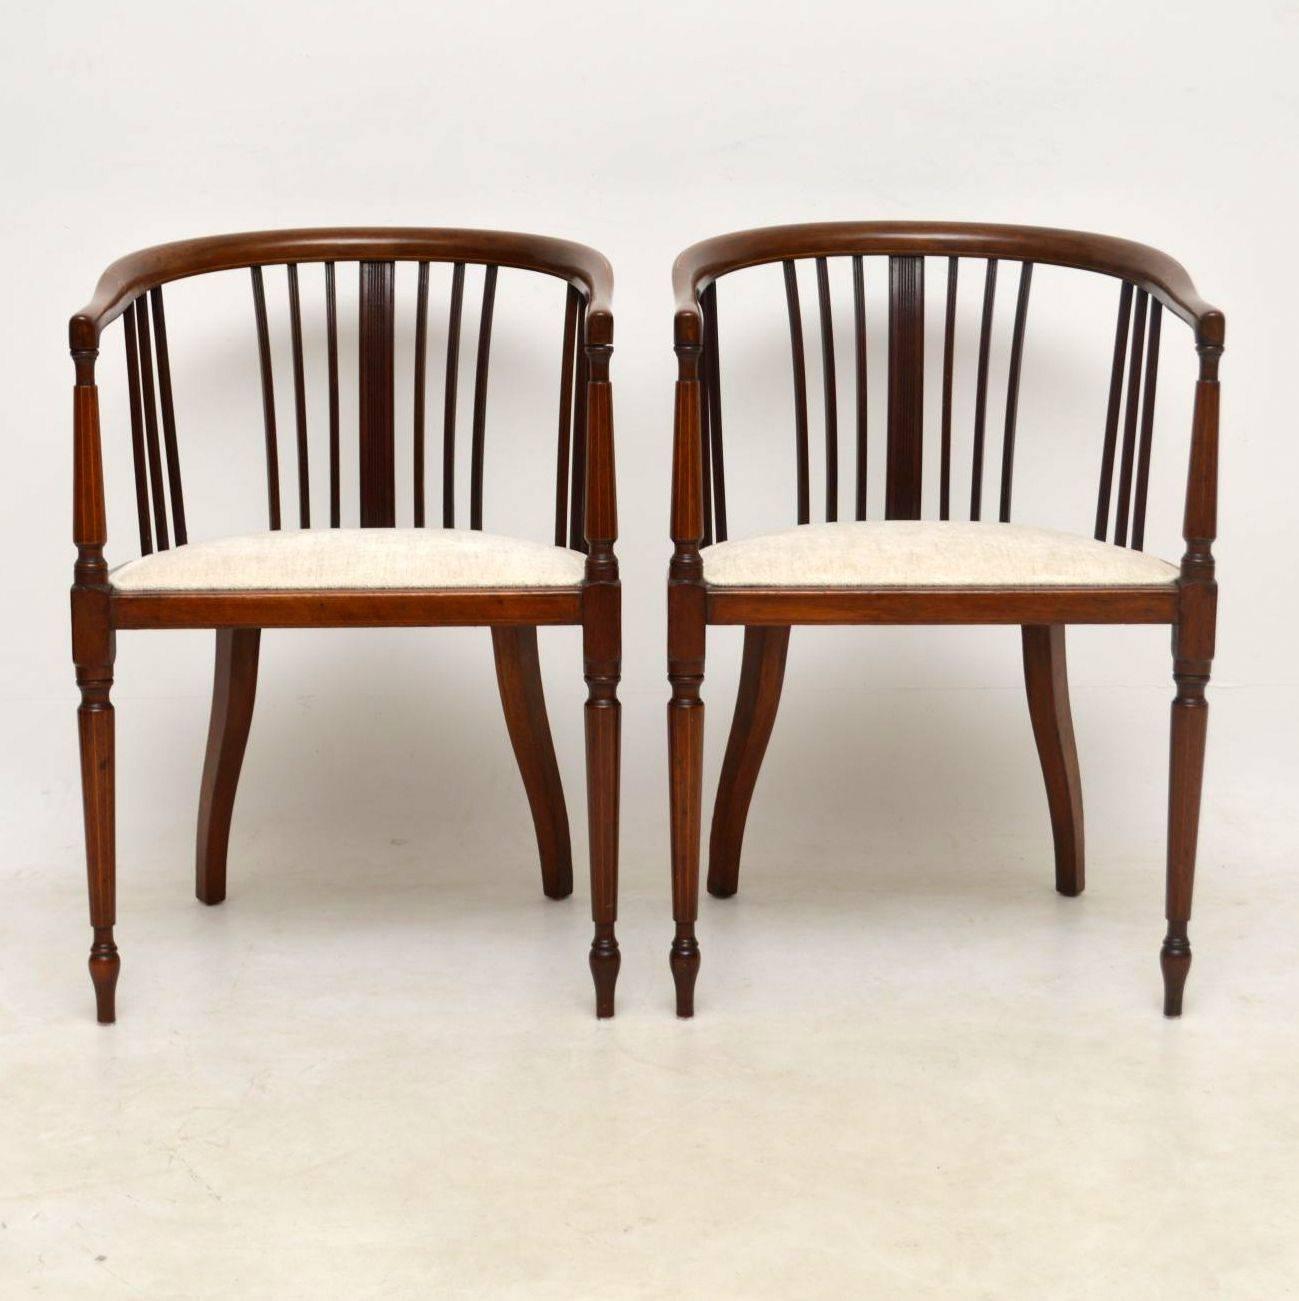 Elegant pair of antique Edwardian mahogany tub back armchairs in good condition and upholstered in a neutral color fabric. The frames are finely inlaid with satinwood on the backs, arms and legs. They have curved backs and sit on turned legs. These